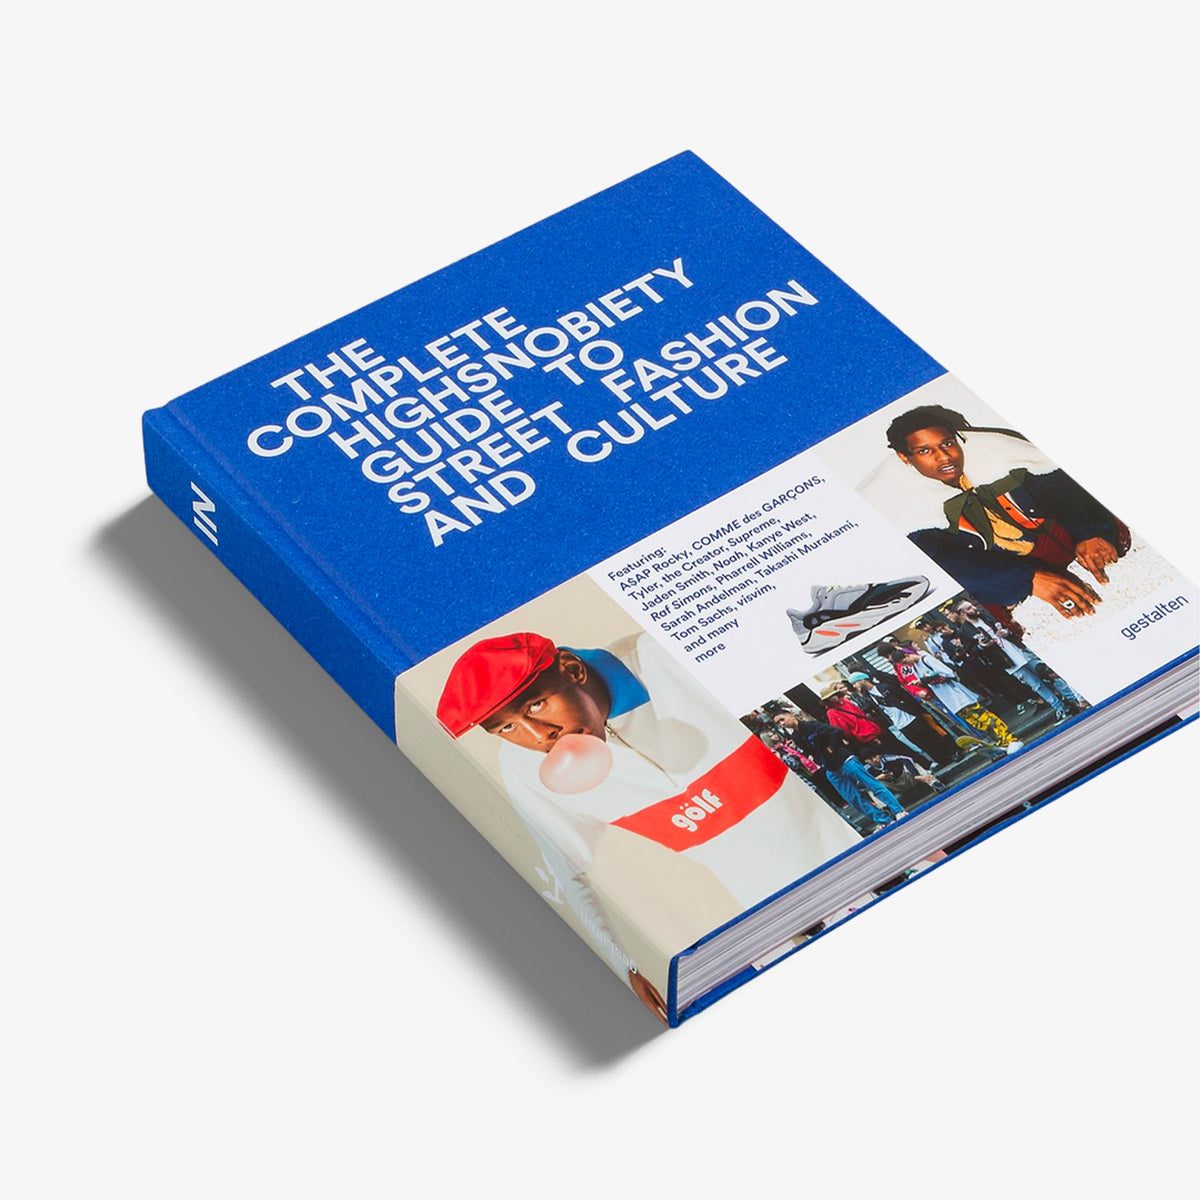 The Incomplete Highsnobiety Guide to Street Fashion and Culture